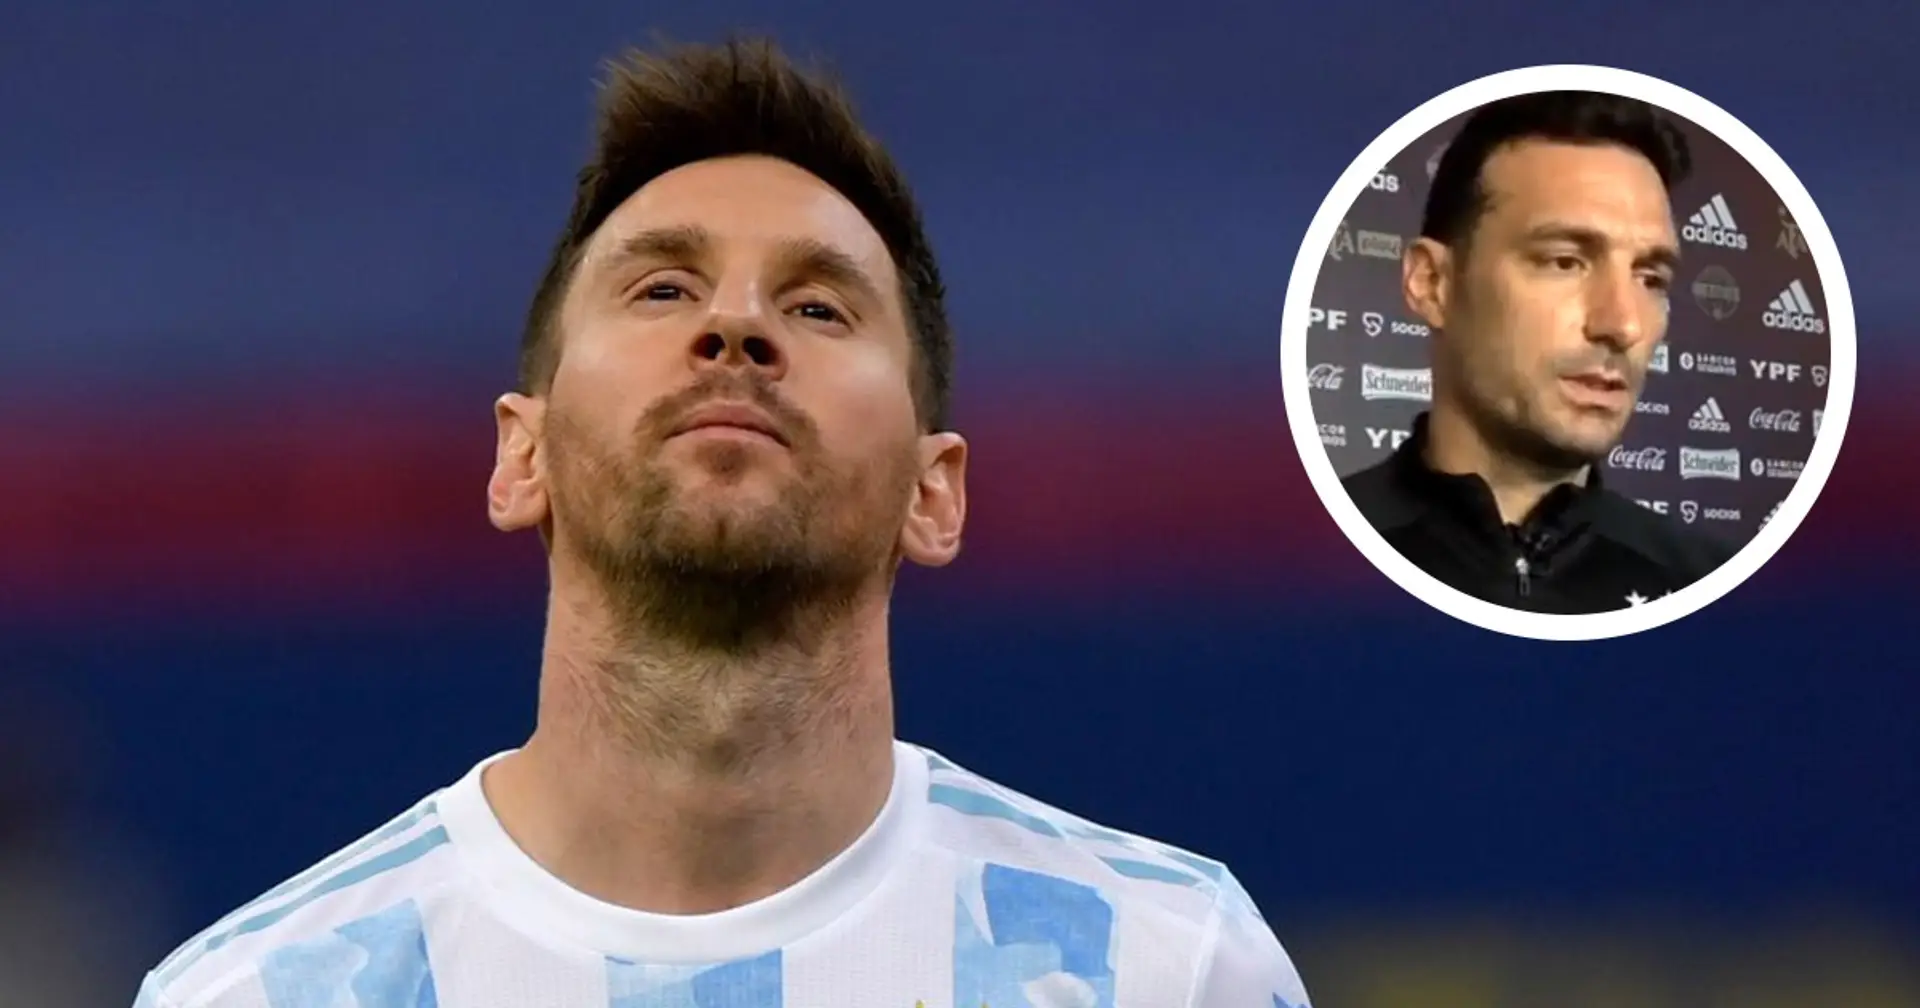 Argentina boss admits it's 'difficult not to count' on Messi despite Leo being 'tired'